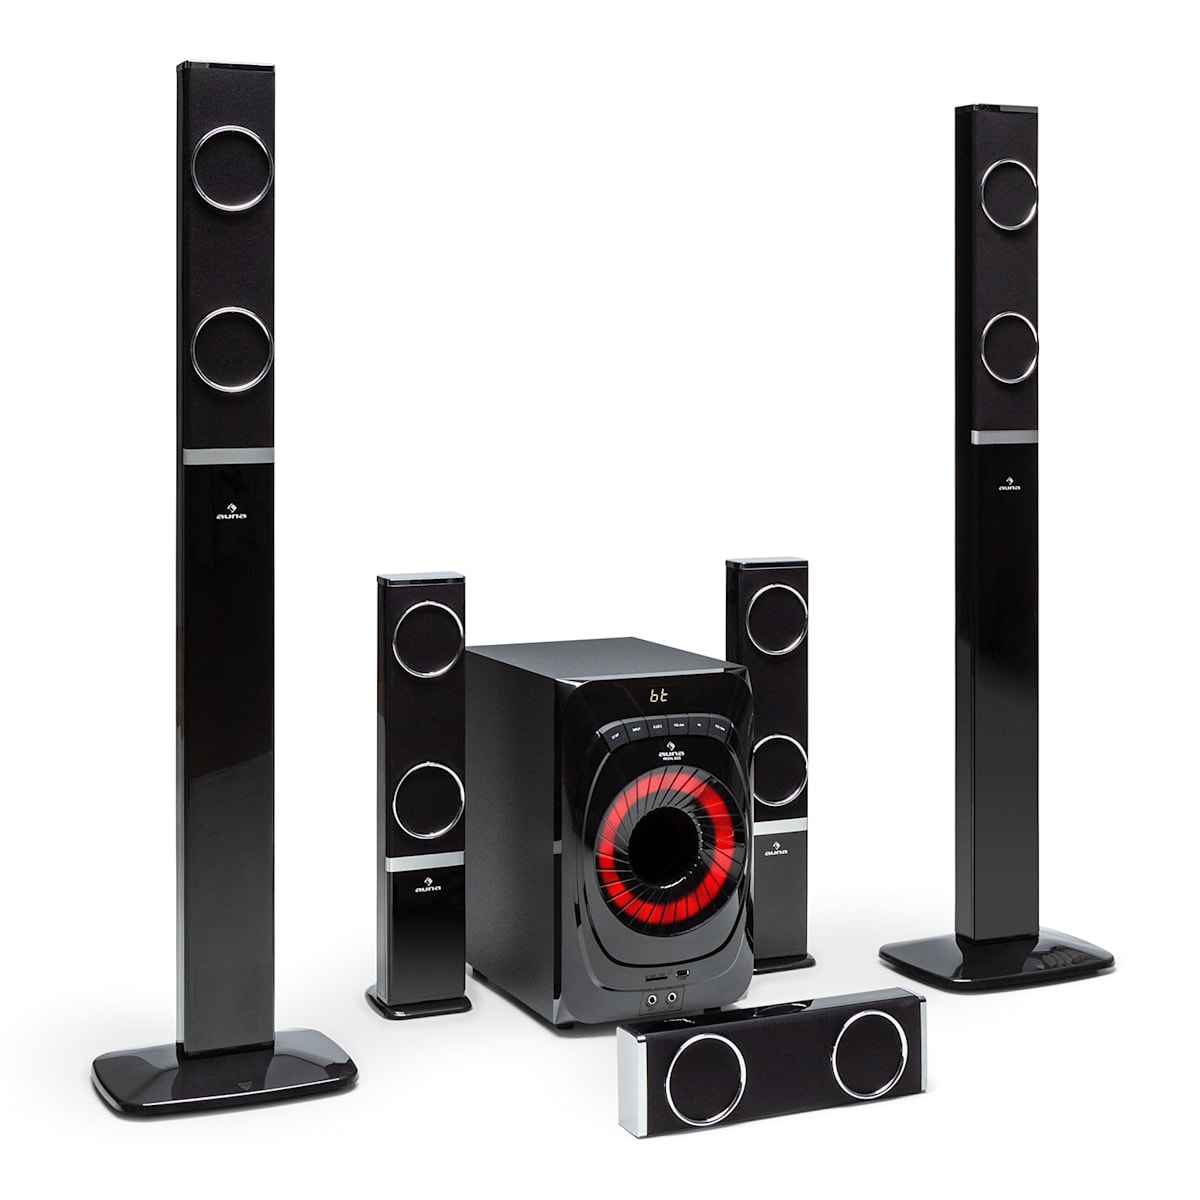 2.0 Channel Stereo Speakers Battery Powered Laptop Speakers For Home  Theaters(black)